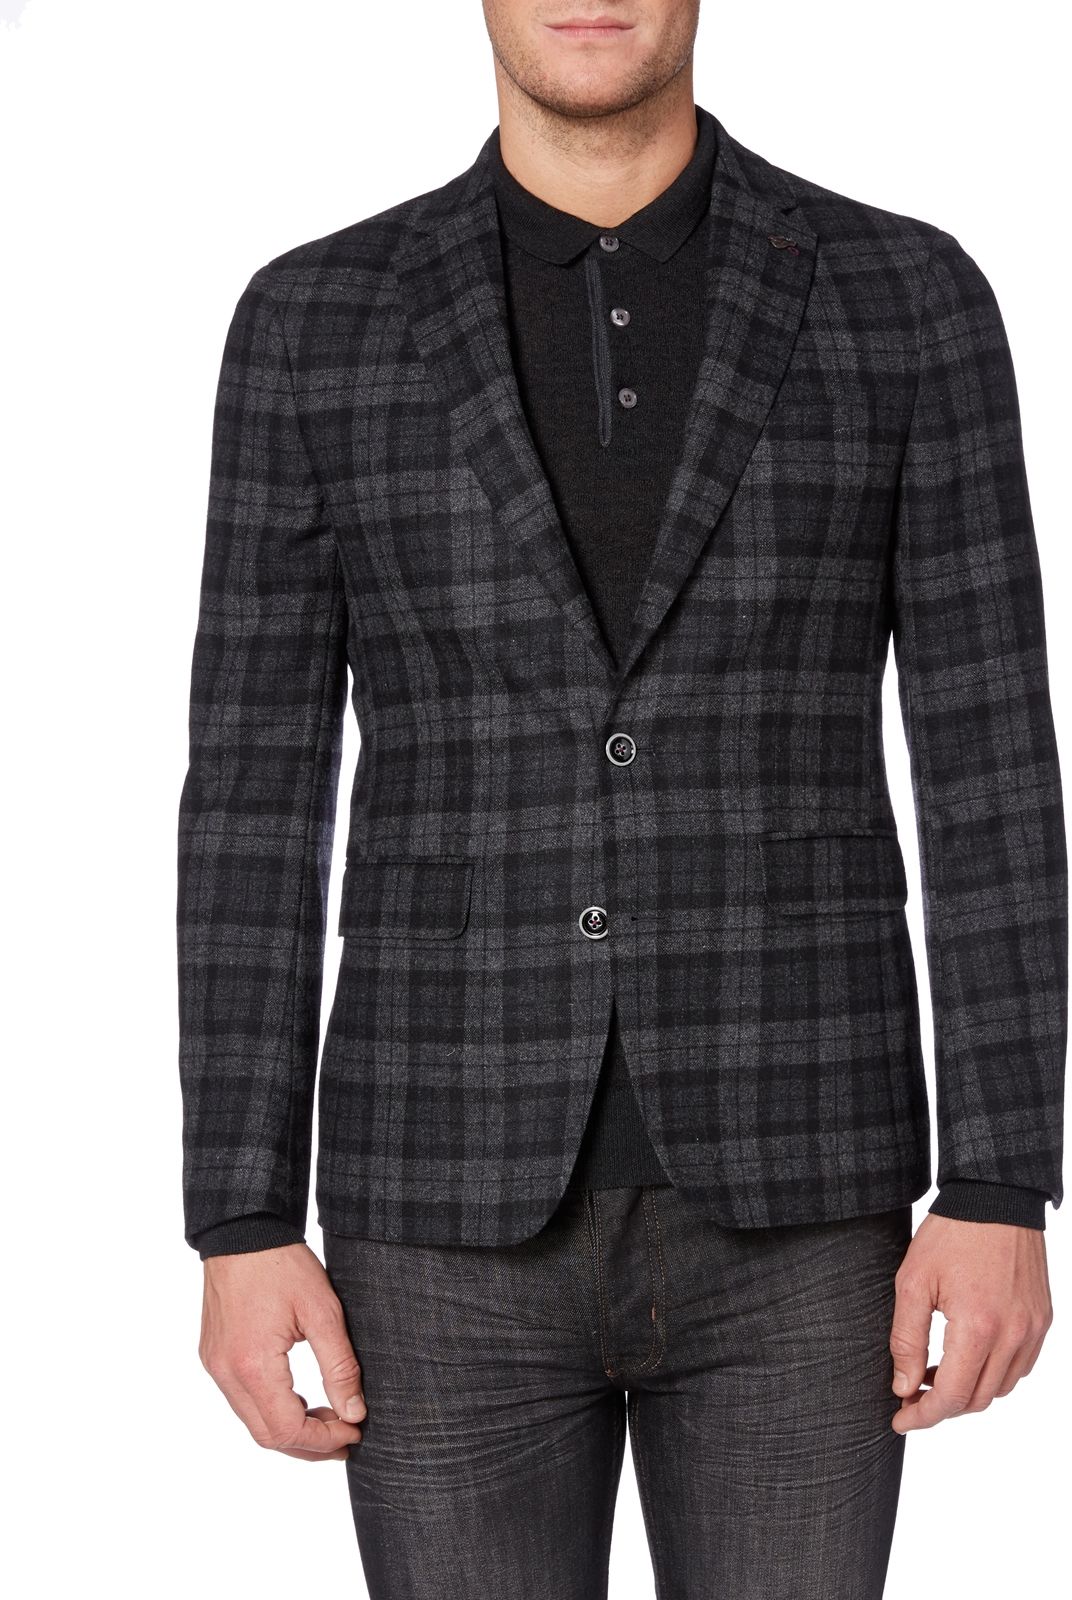 Remus Uomo Nero Jacket Charcoal - Suits & Tailoring - Barbours